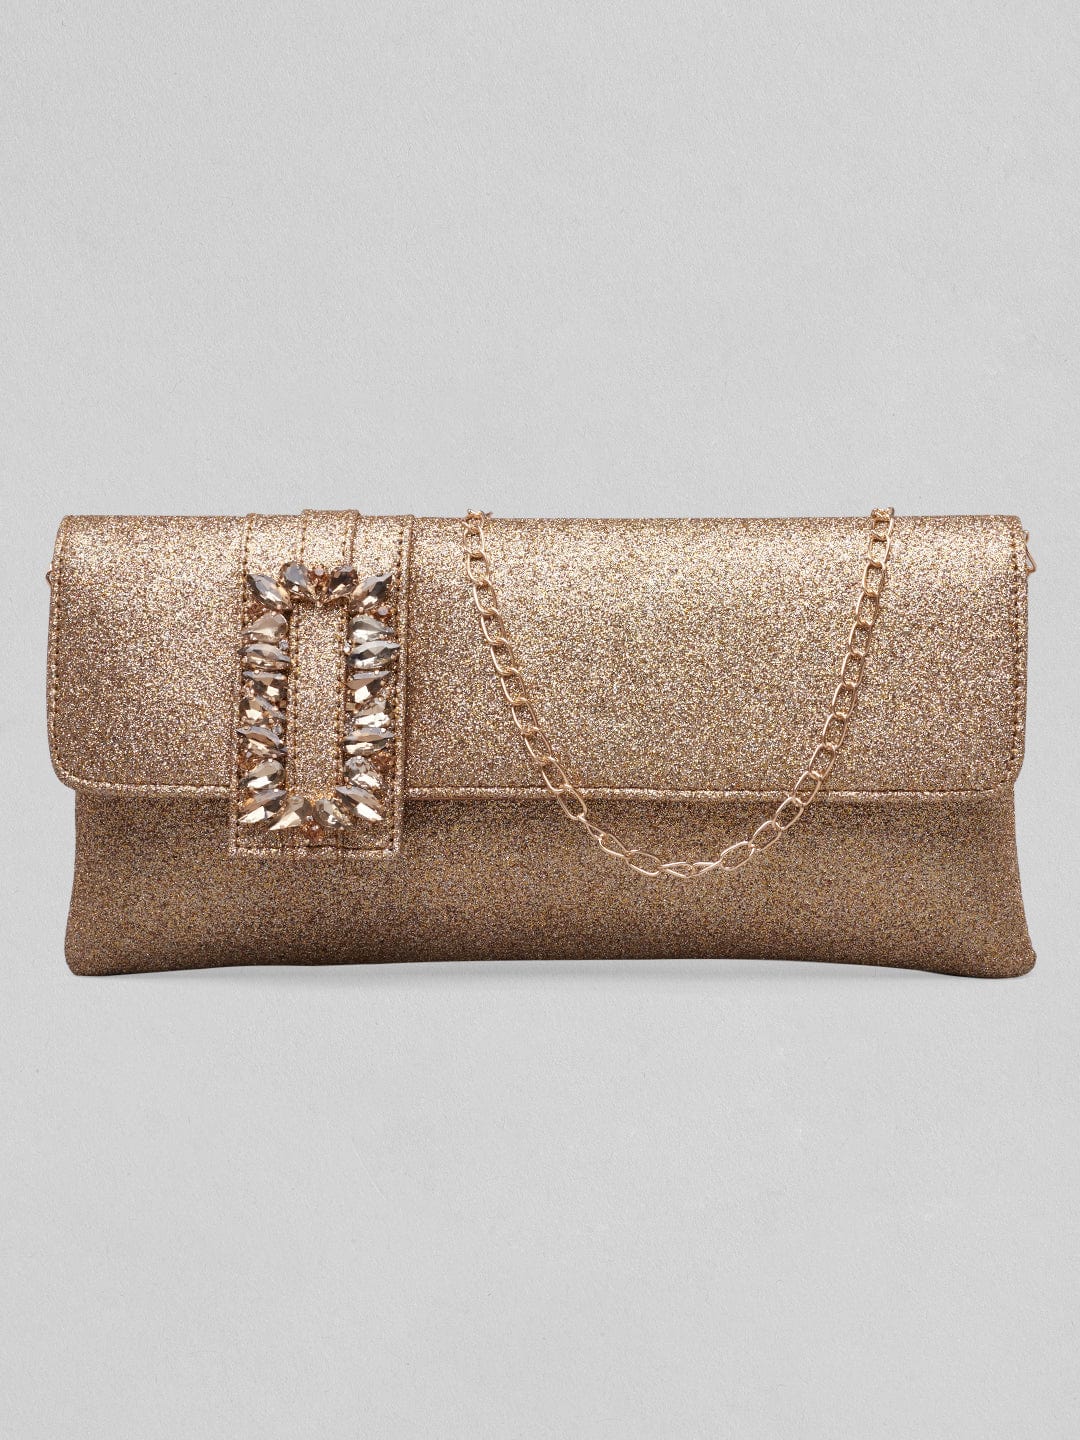 Rubans Gold Colour Bag With Shine And Studded Stone Design. Handbag & Wallet Accessories